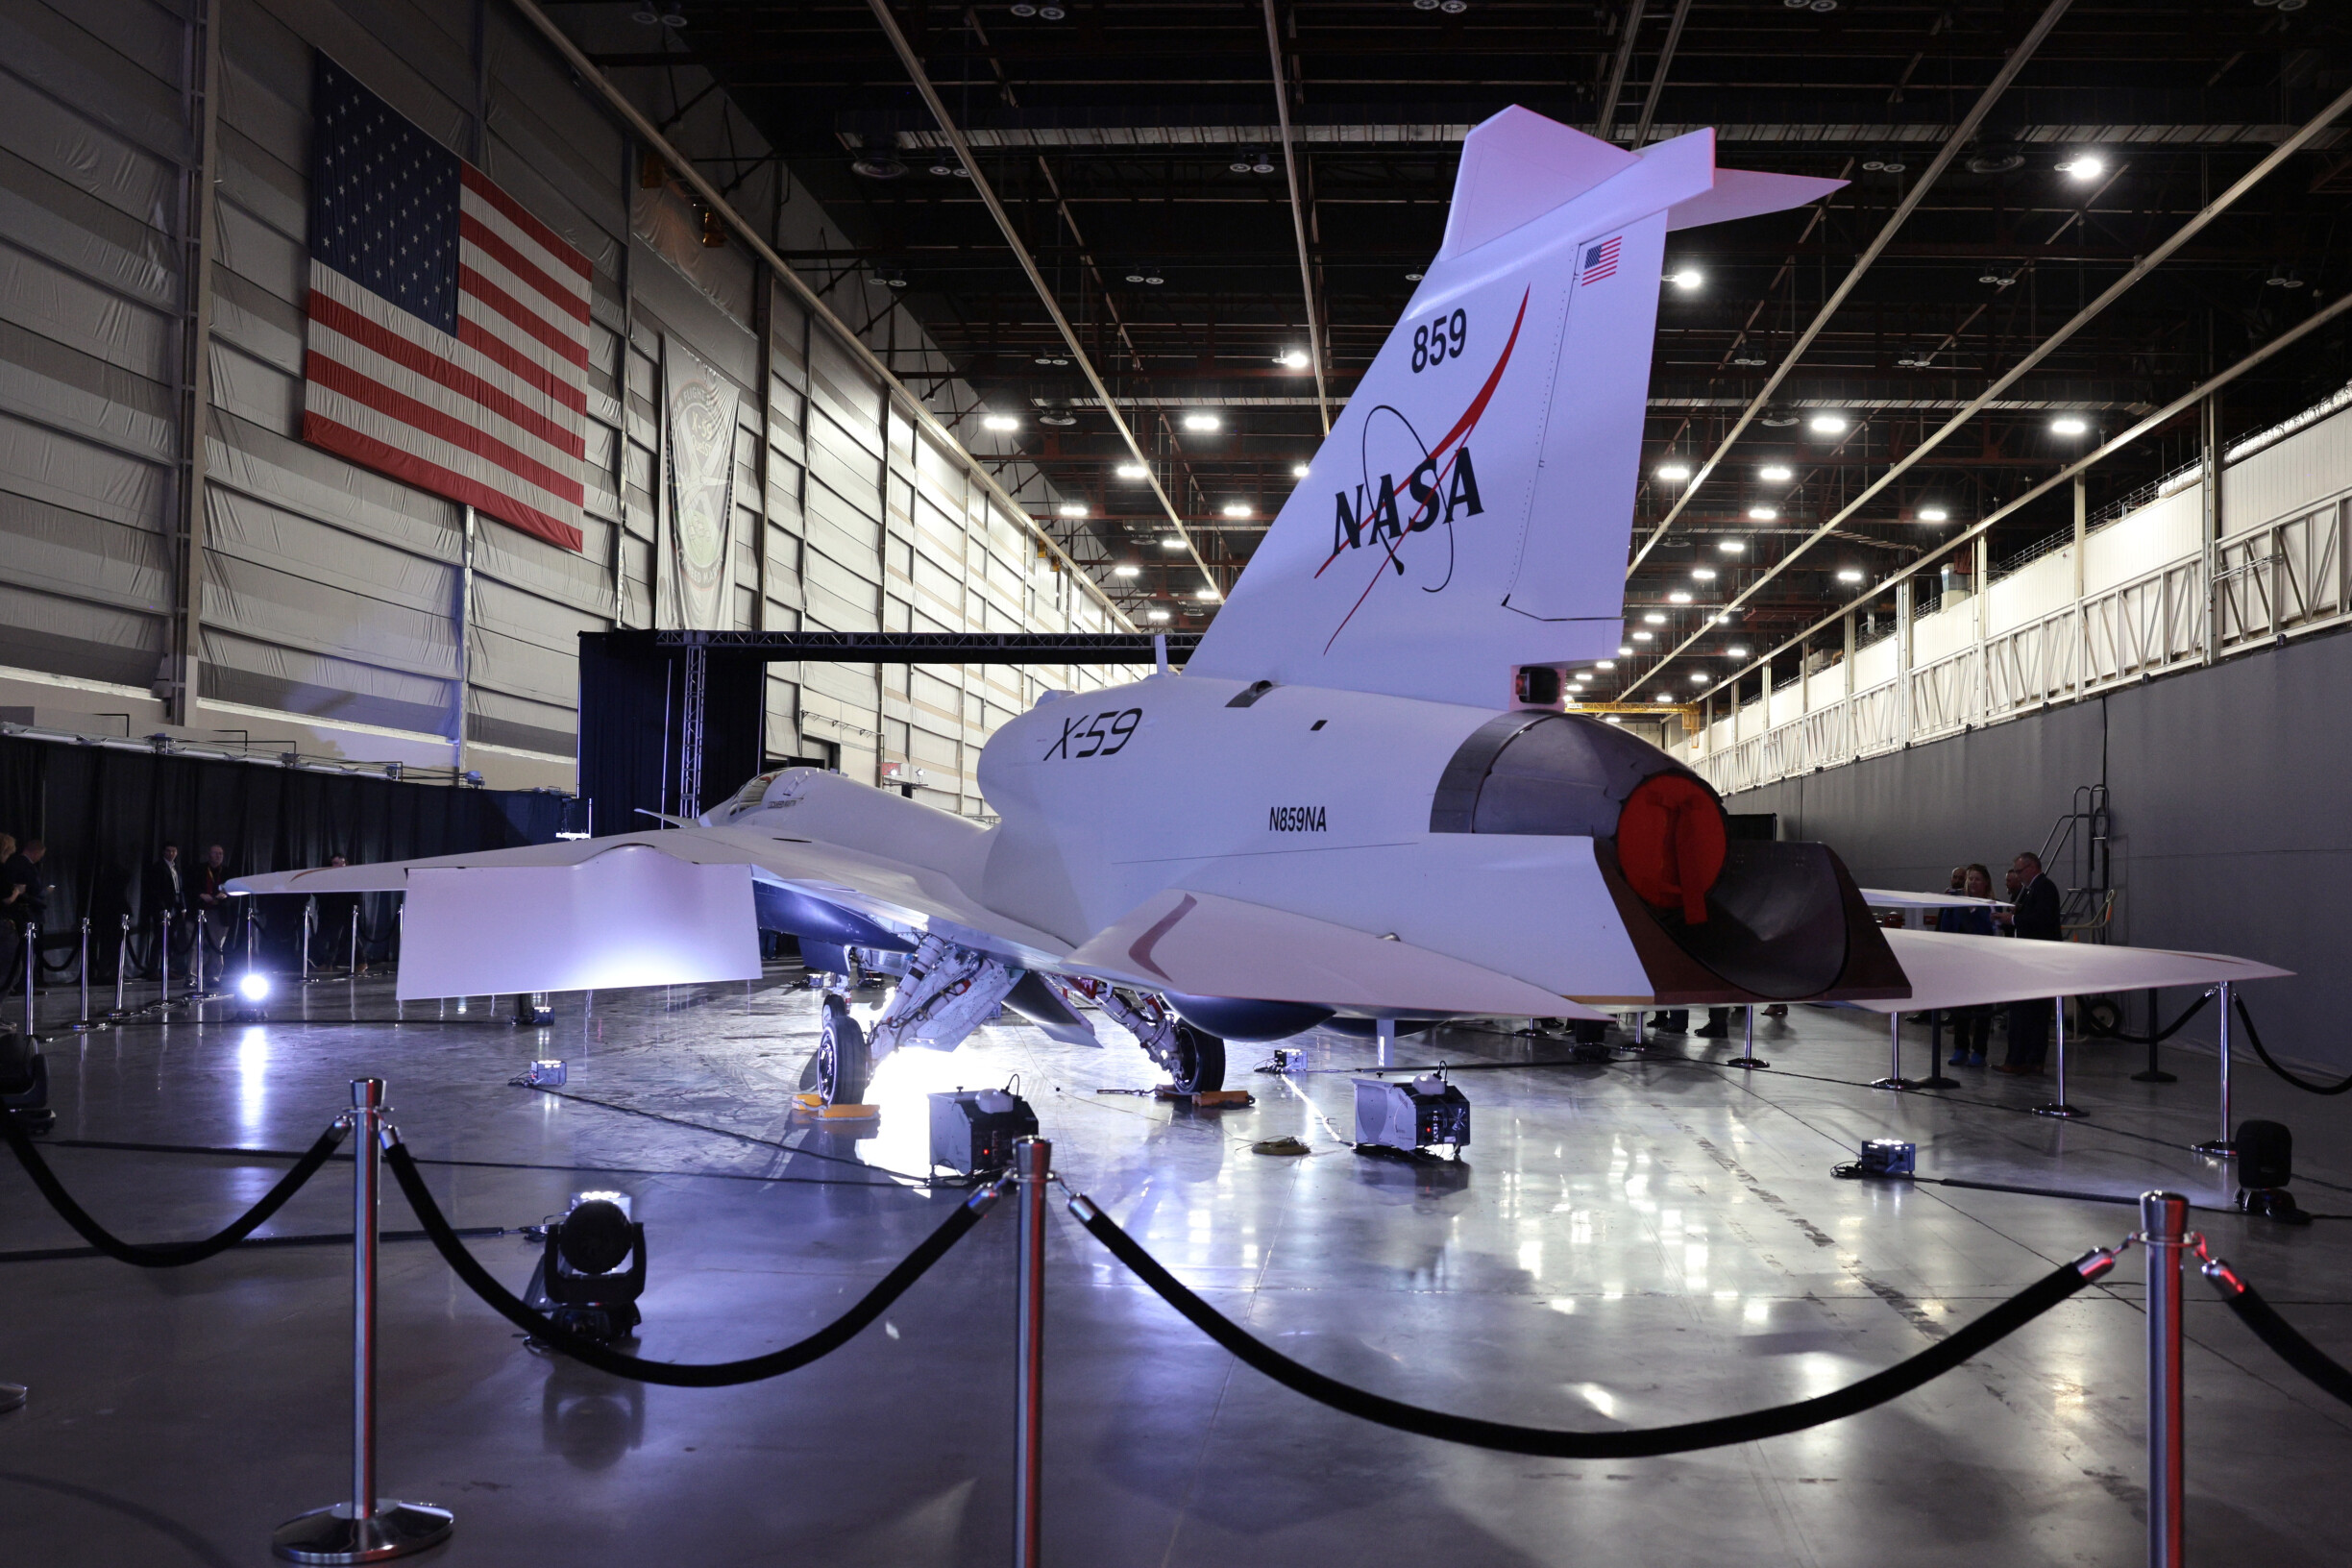 NASA unveils an experimental plane that breaks the sound barrier without the usual noise